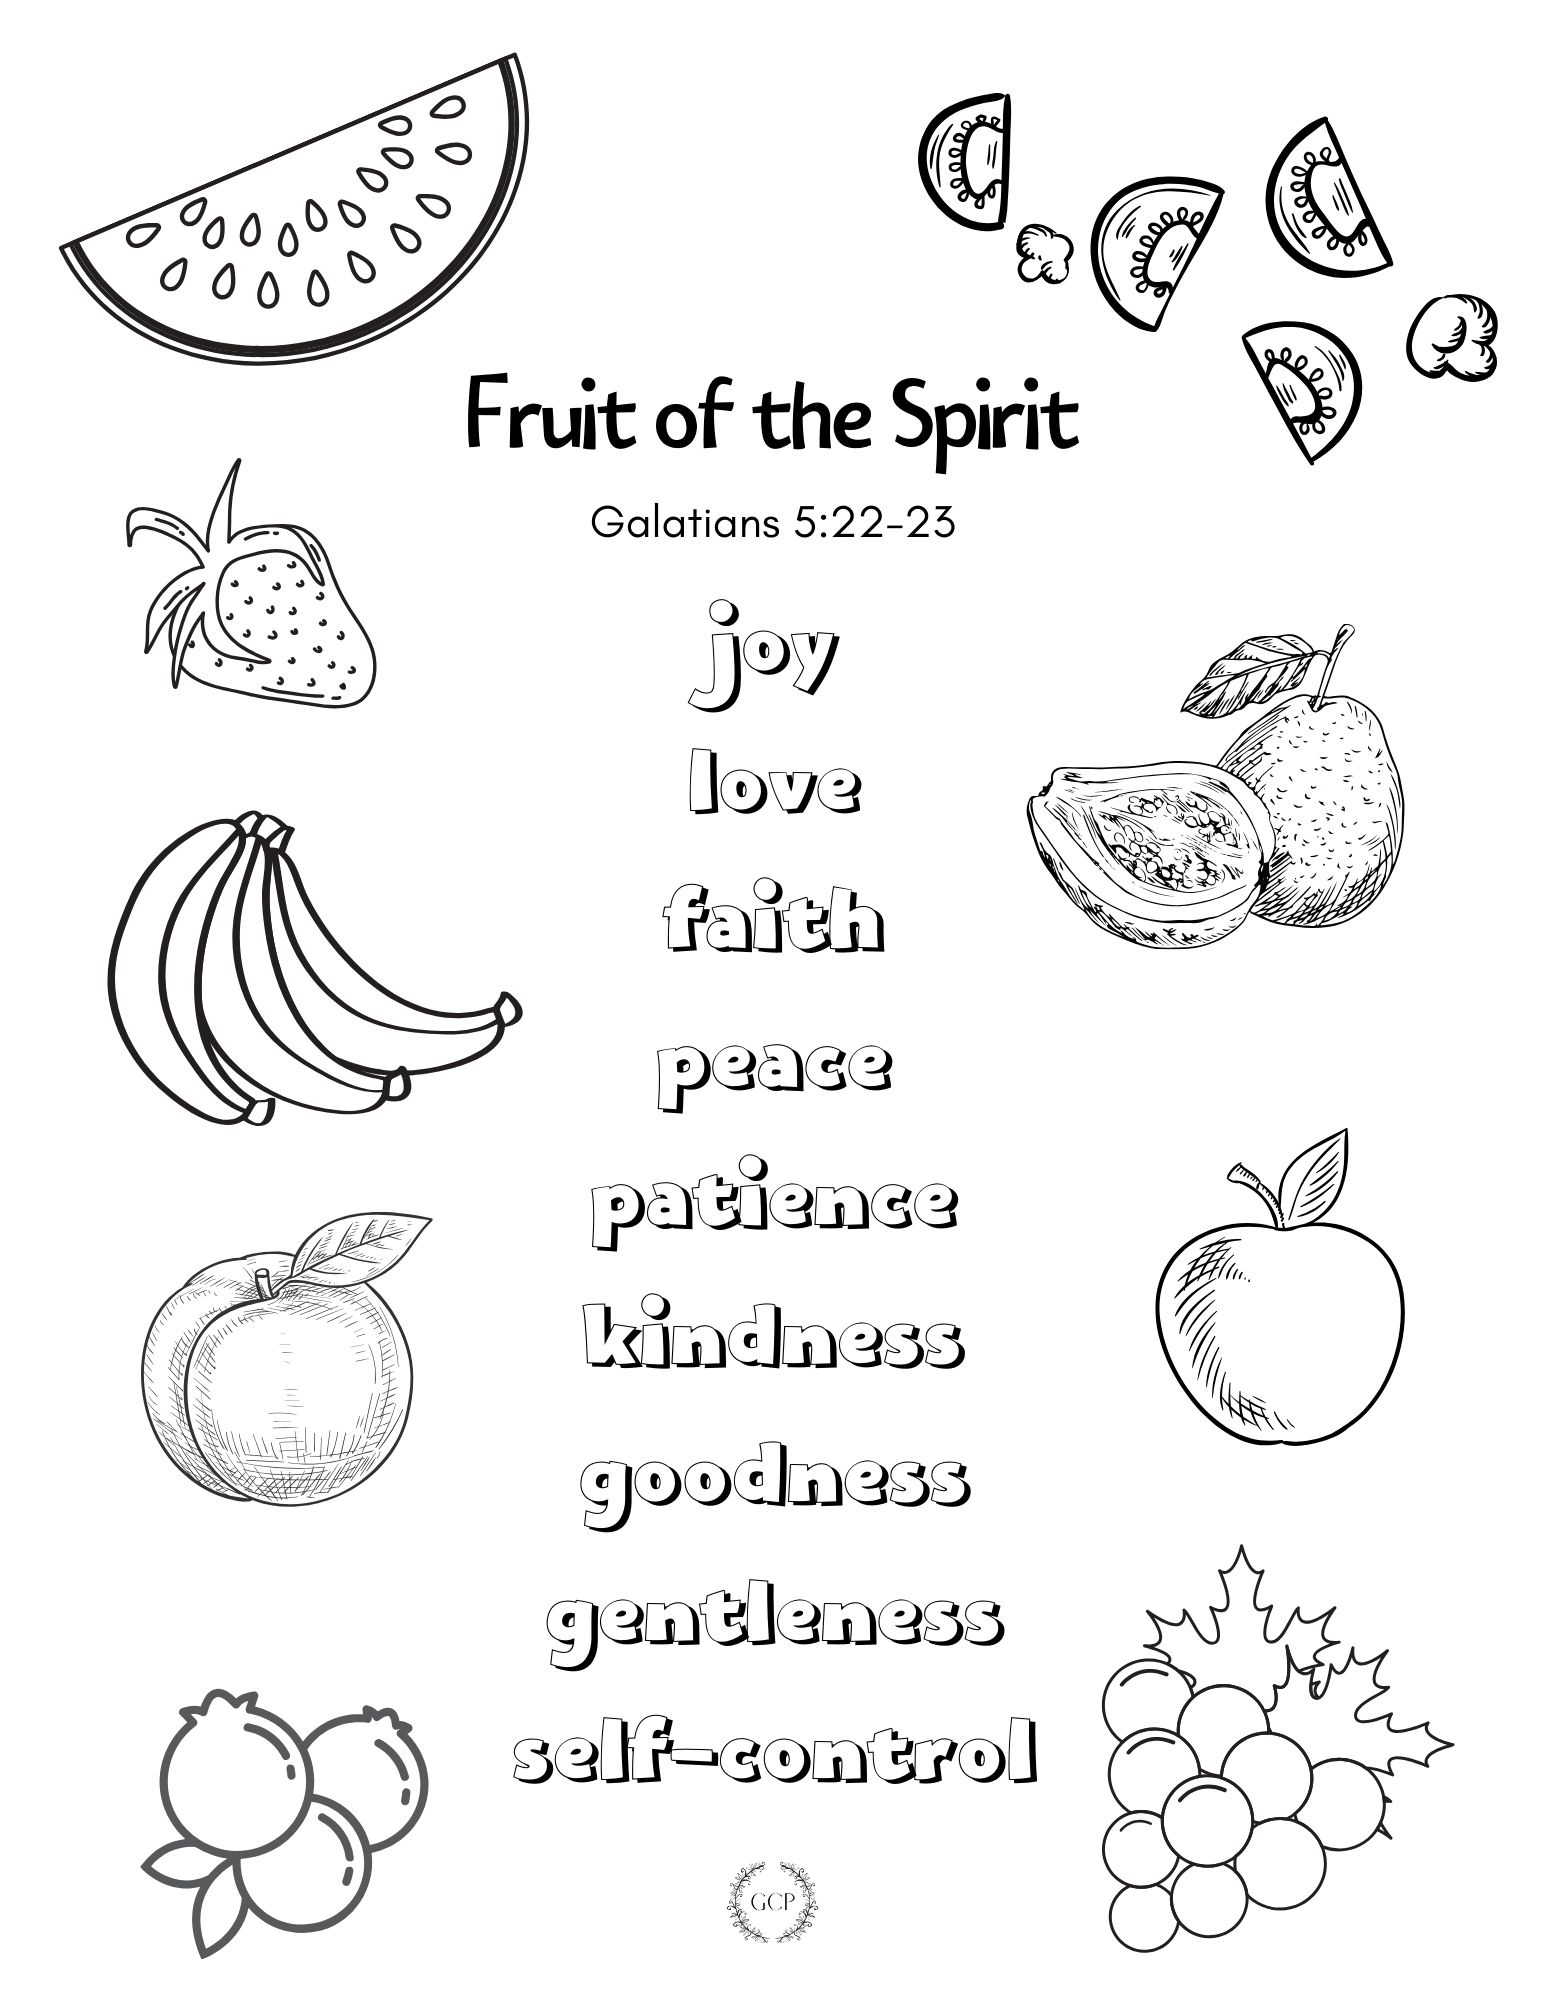 Free Bible Coloring Pages For Kids - Download Now - Gentle Christian